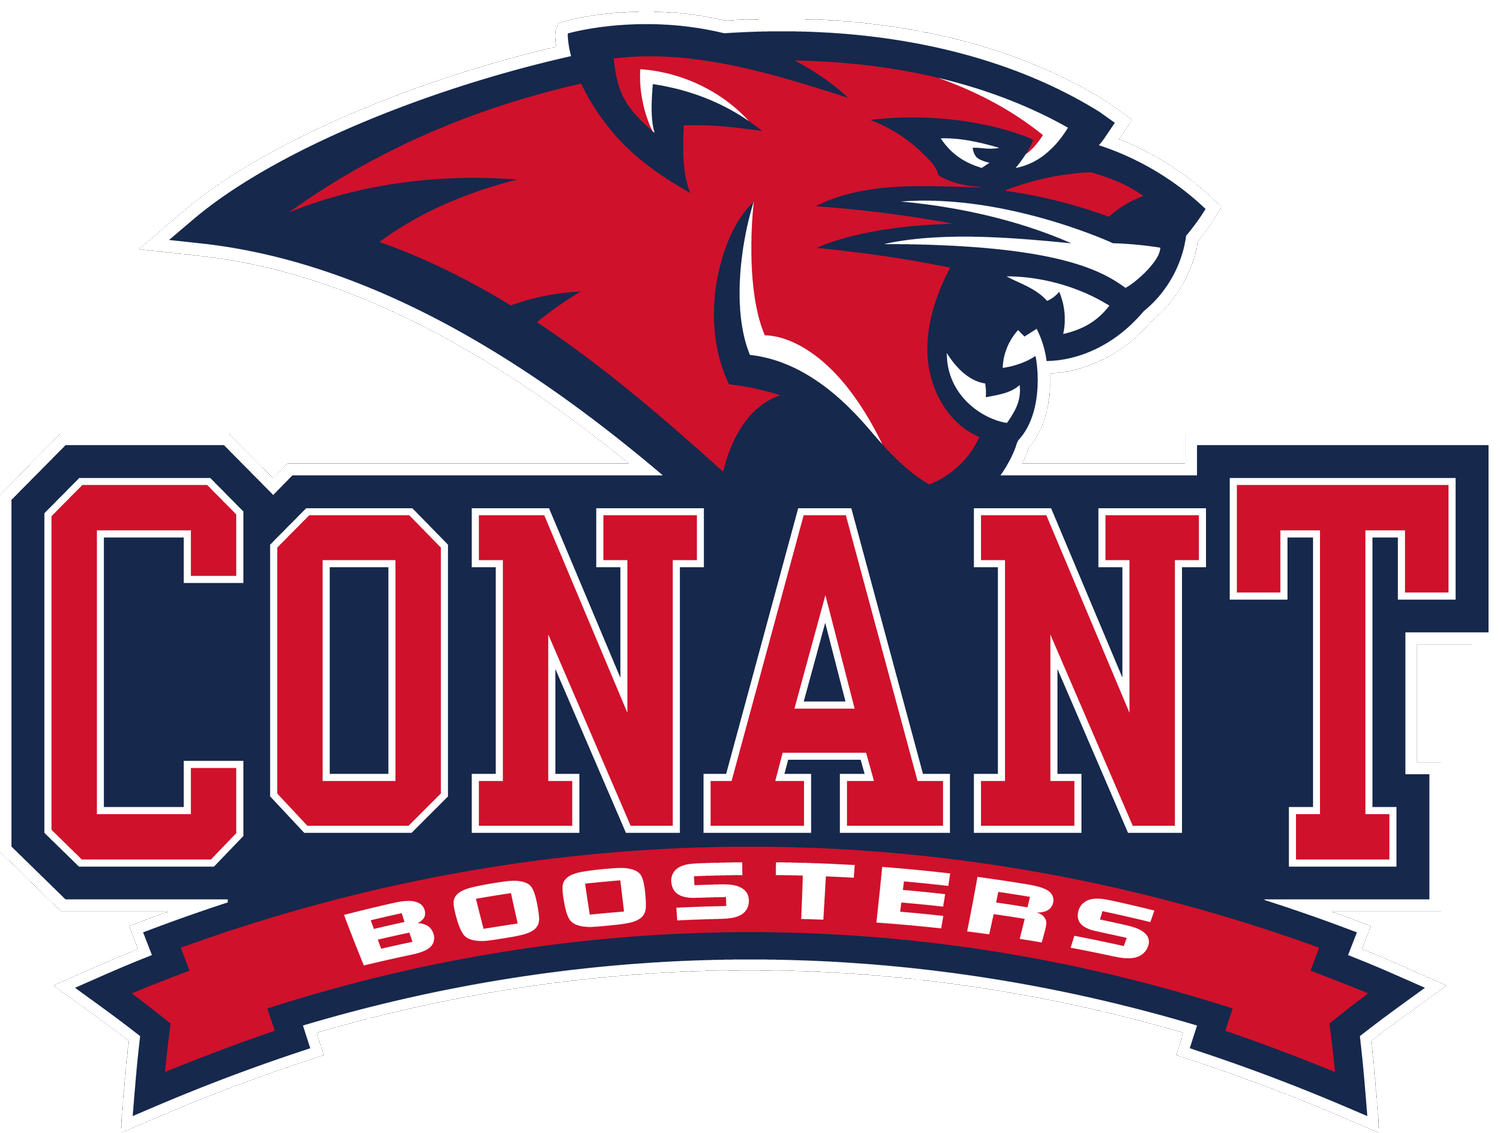 Conant High School Boosters